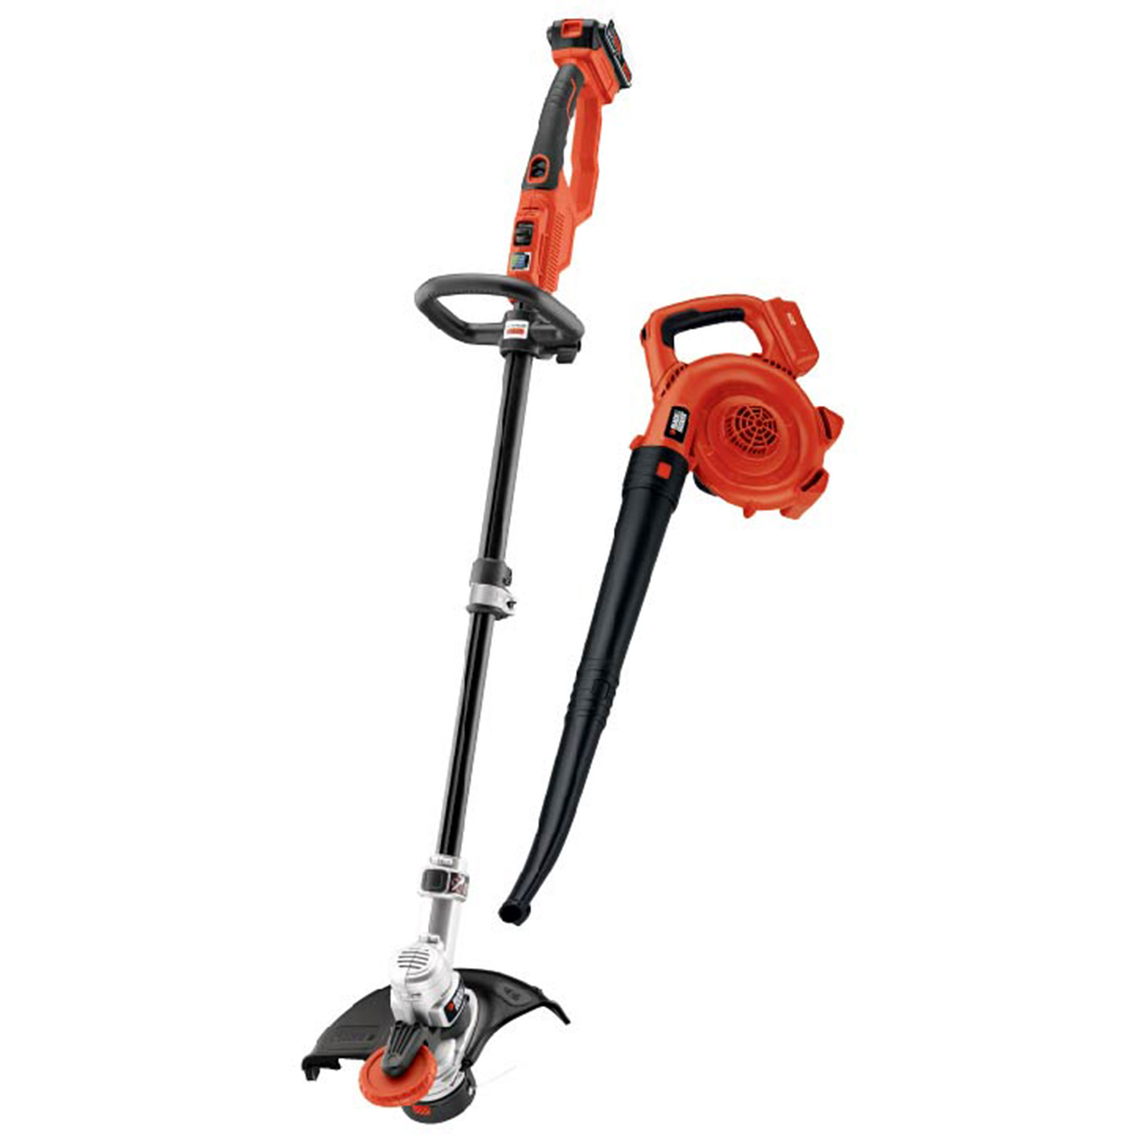 Black & Decker 20v Max String Trimmer And Sweeper Lithium Ion Combo Kit, Trimmers, Edgers & Blowers, Patio, Garden & Garage